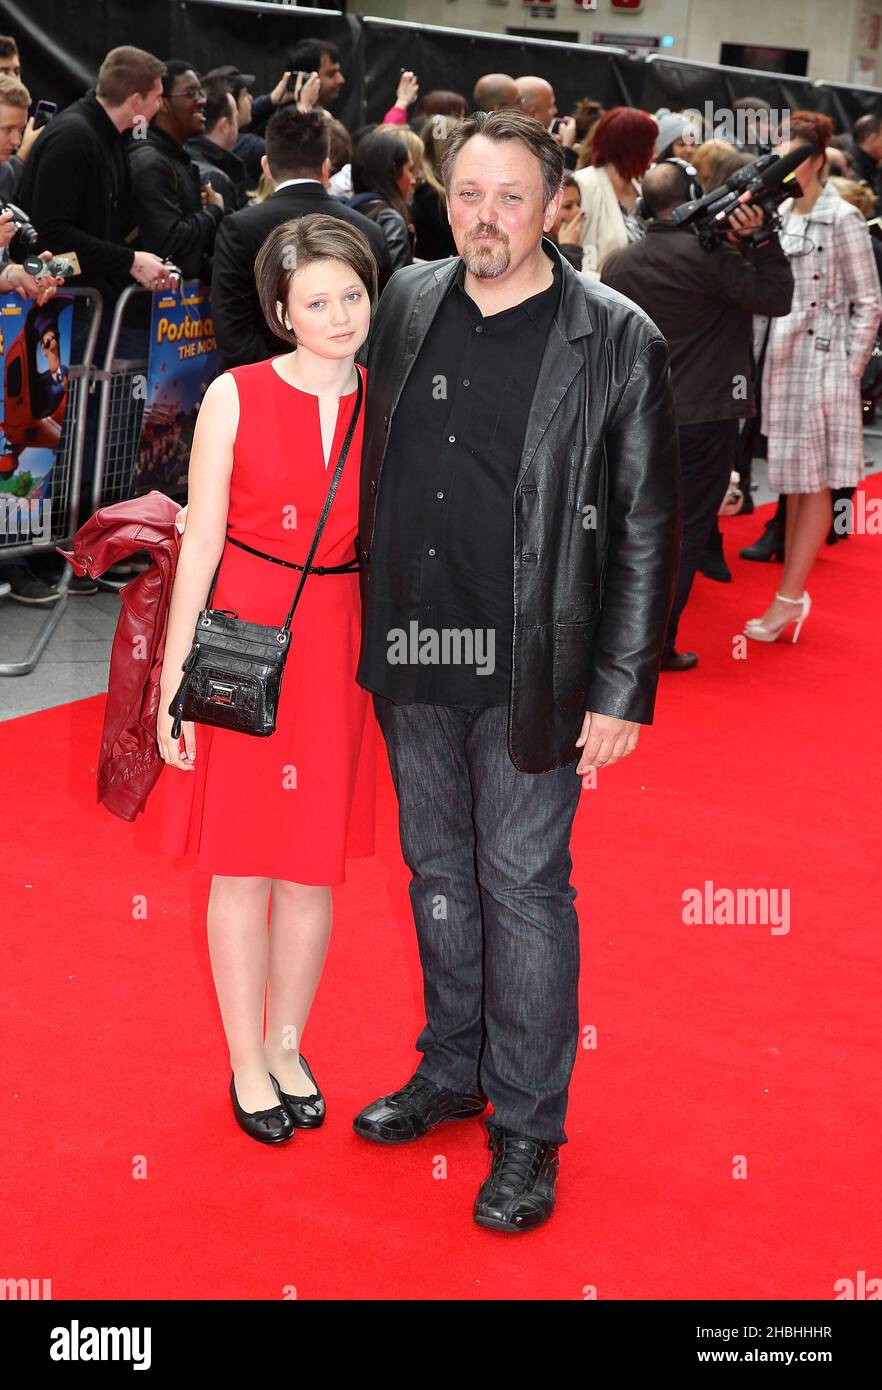 Mike Disa (the director) attending the Postman Pat The Movie World Premier at The West End Odeon in Leicester Square in London. Stock Photo